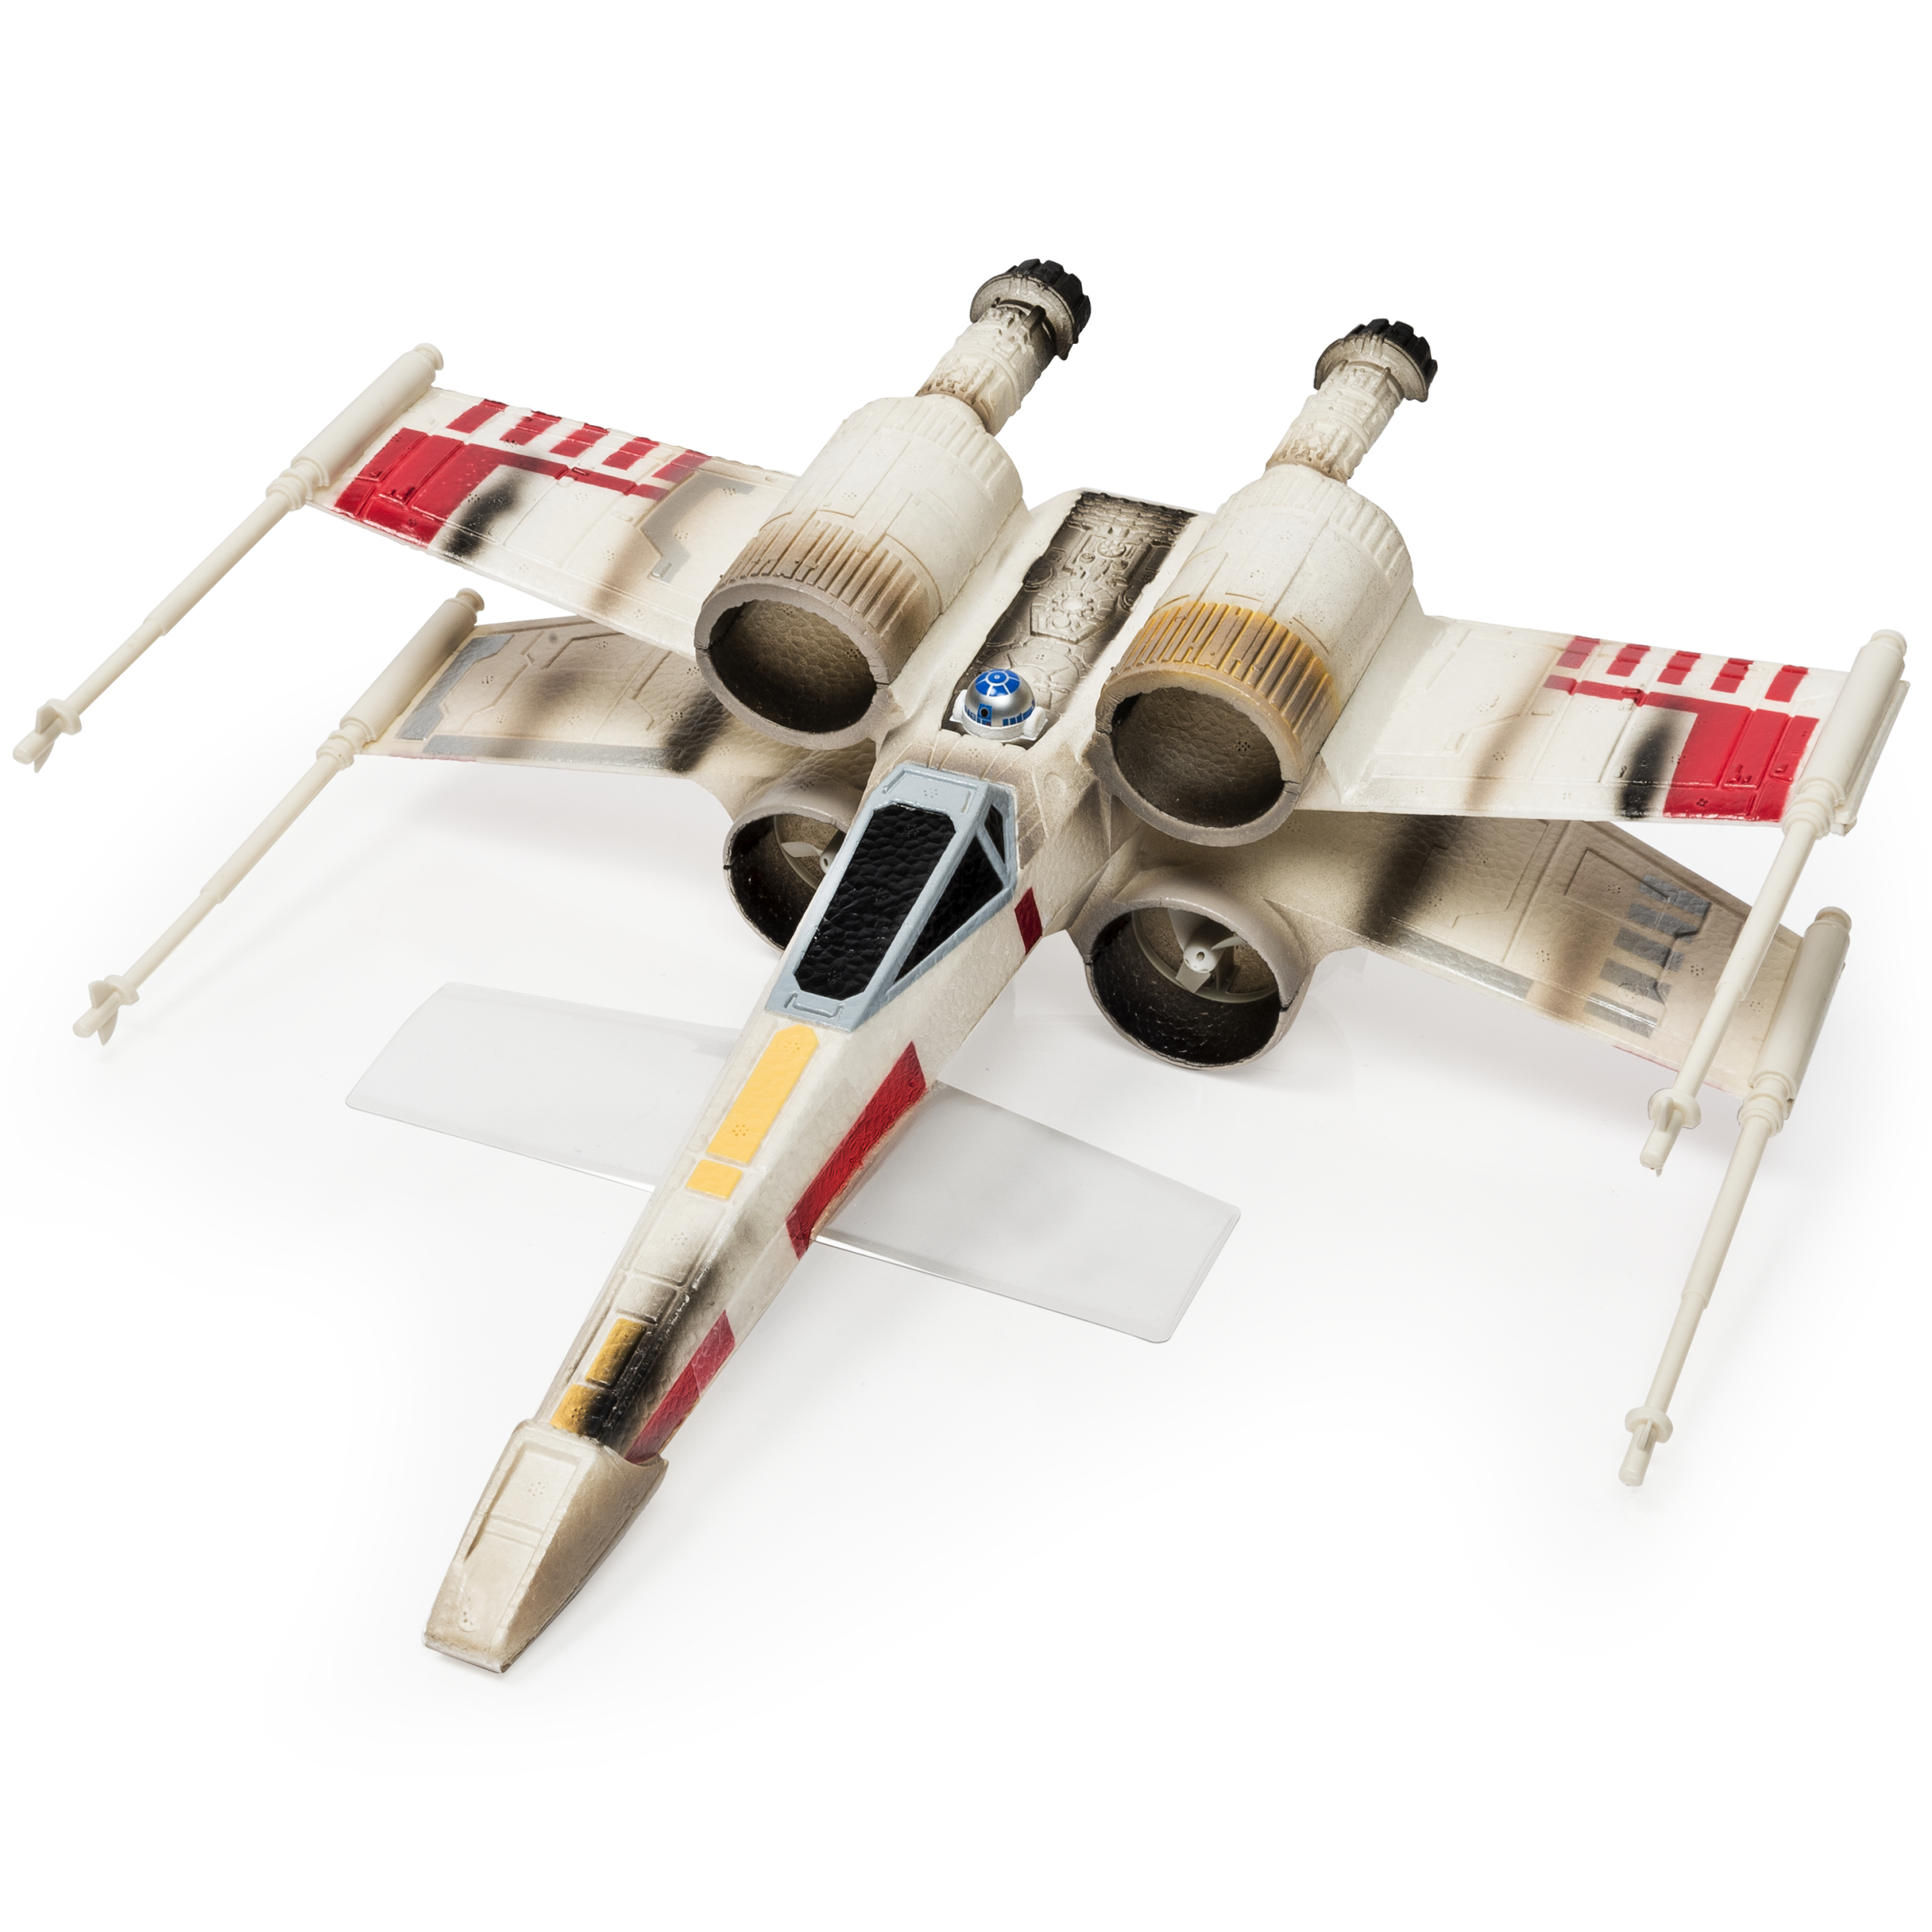 Air Hogs Star Wars Remote Control X-Wing Starfighter - image 3 of 6